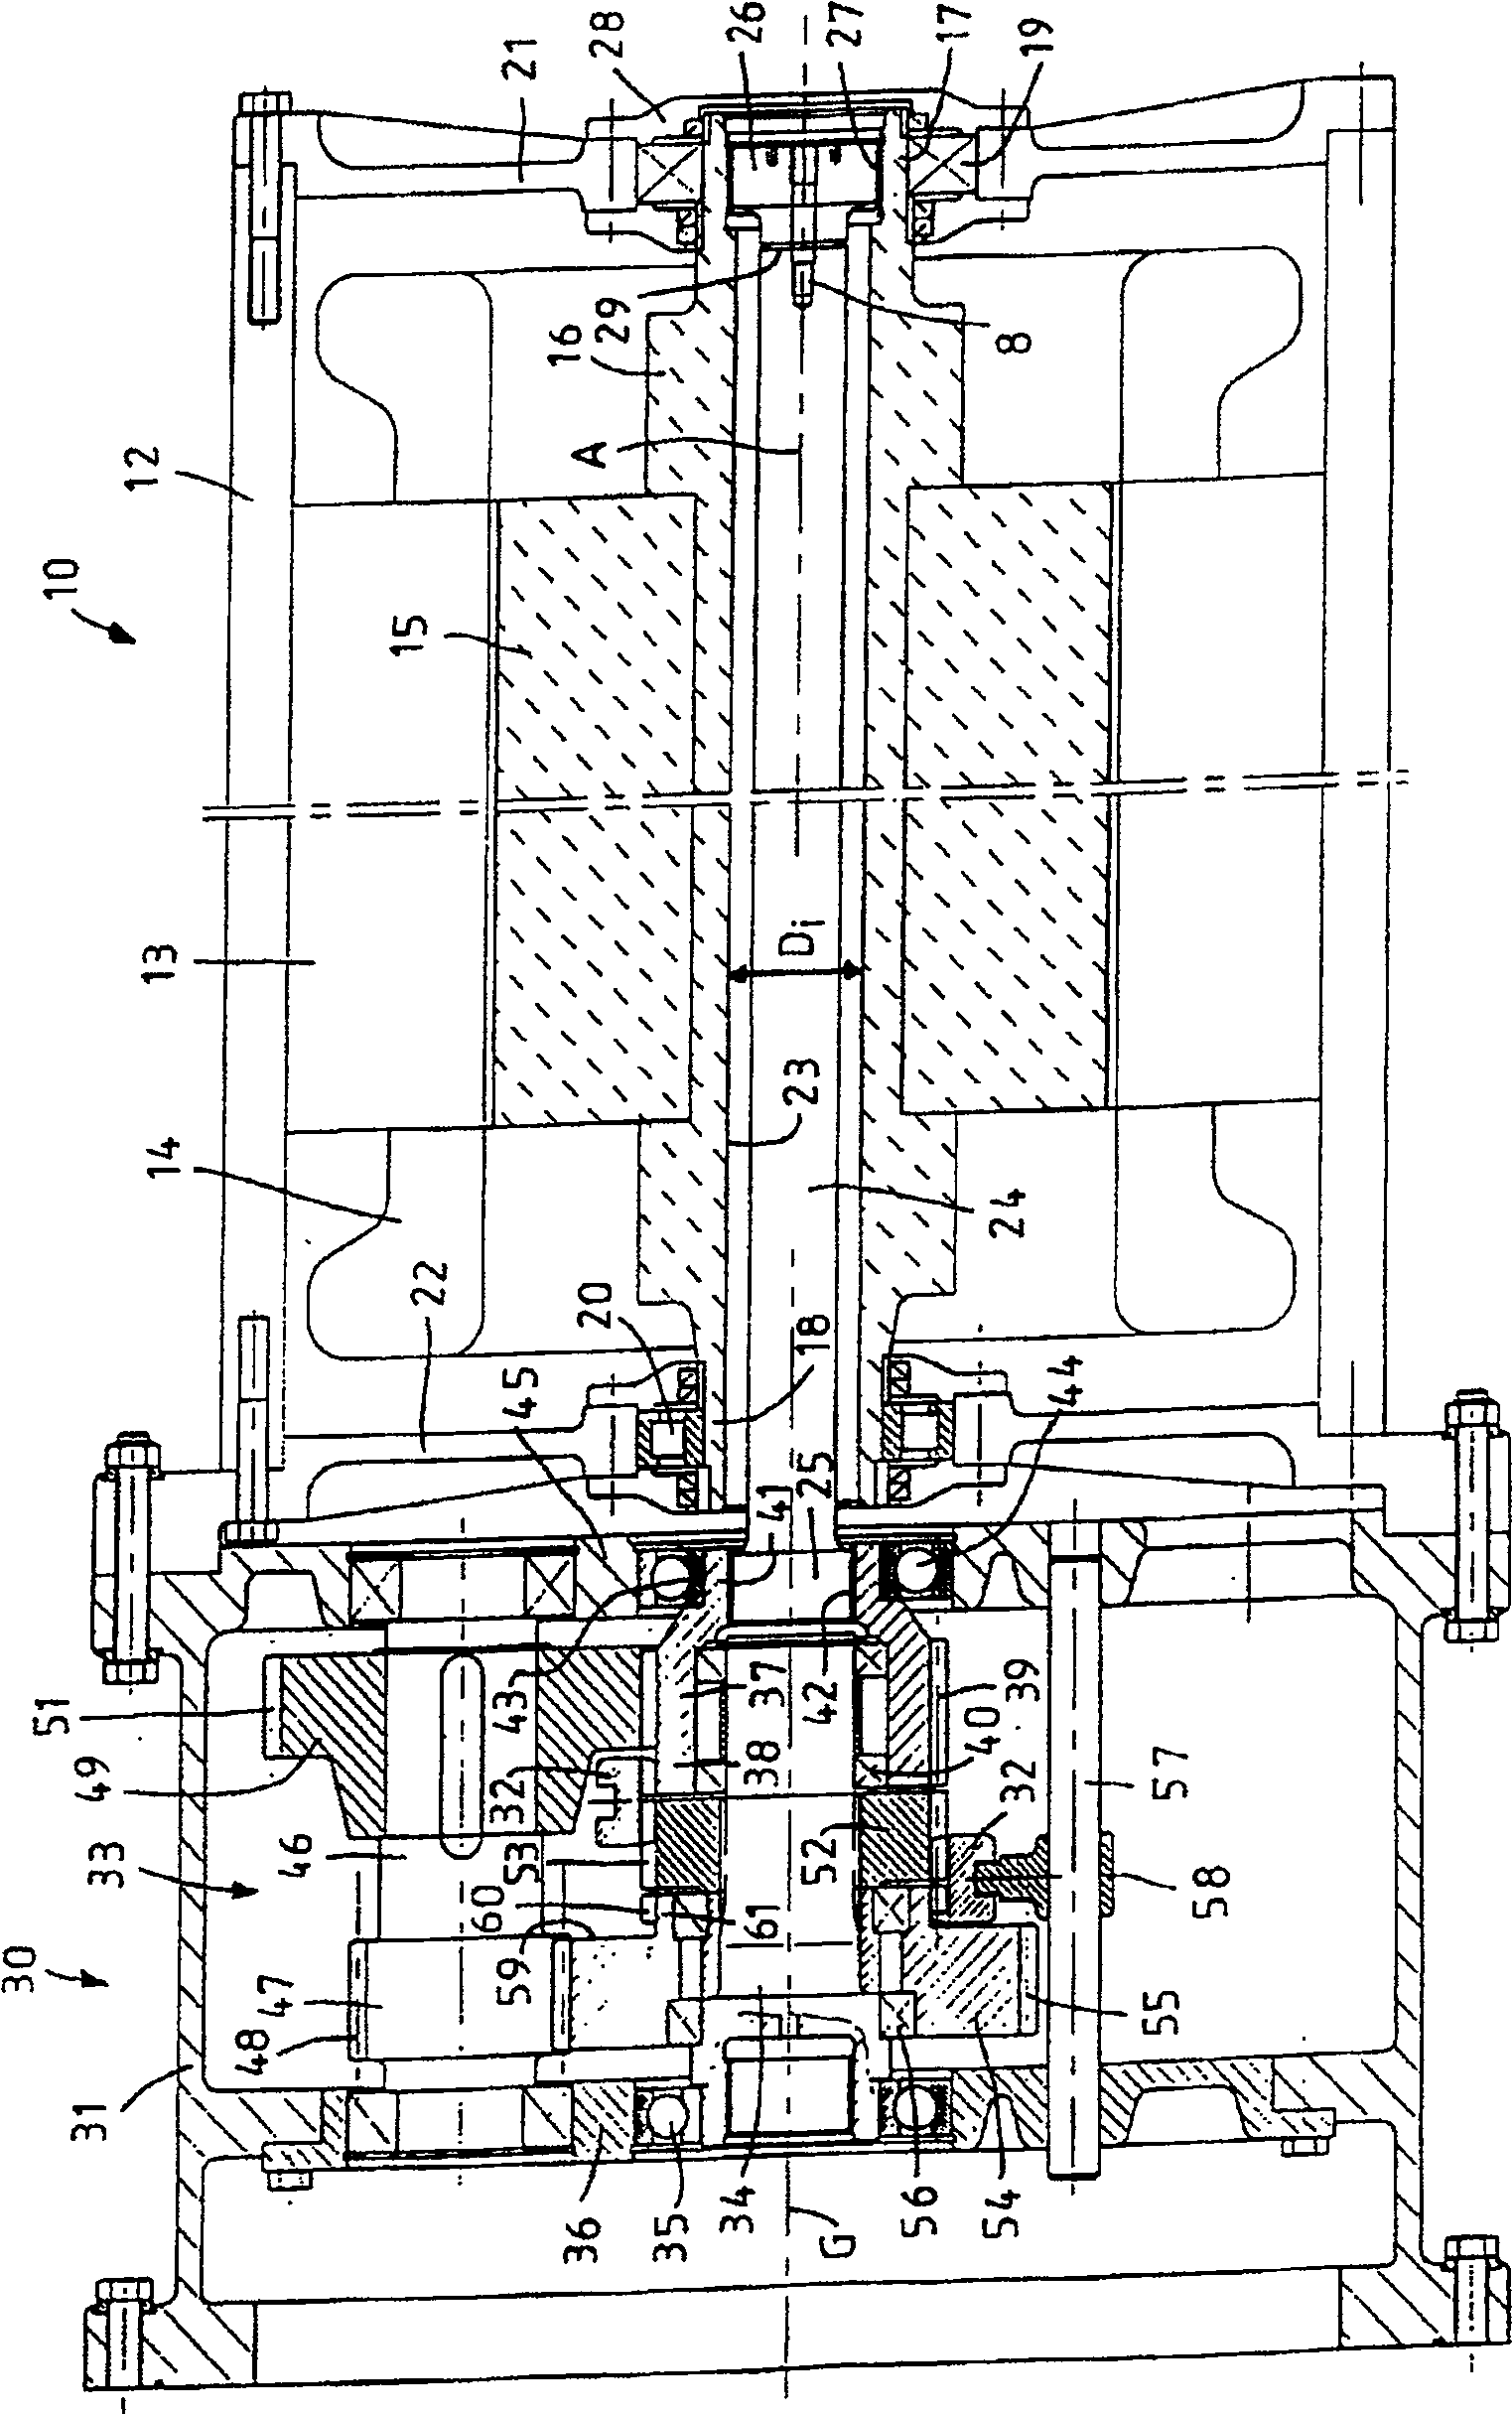 Drive system for chain sprockets of chain drives